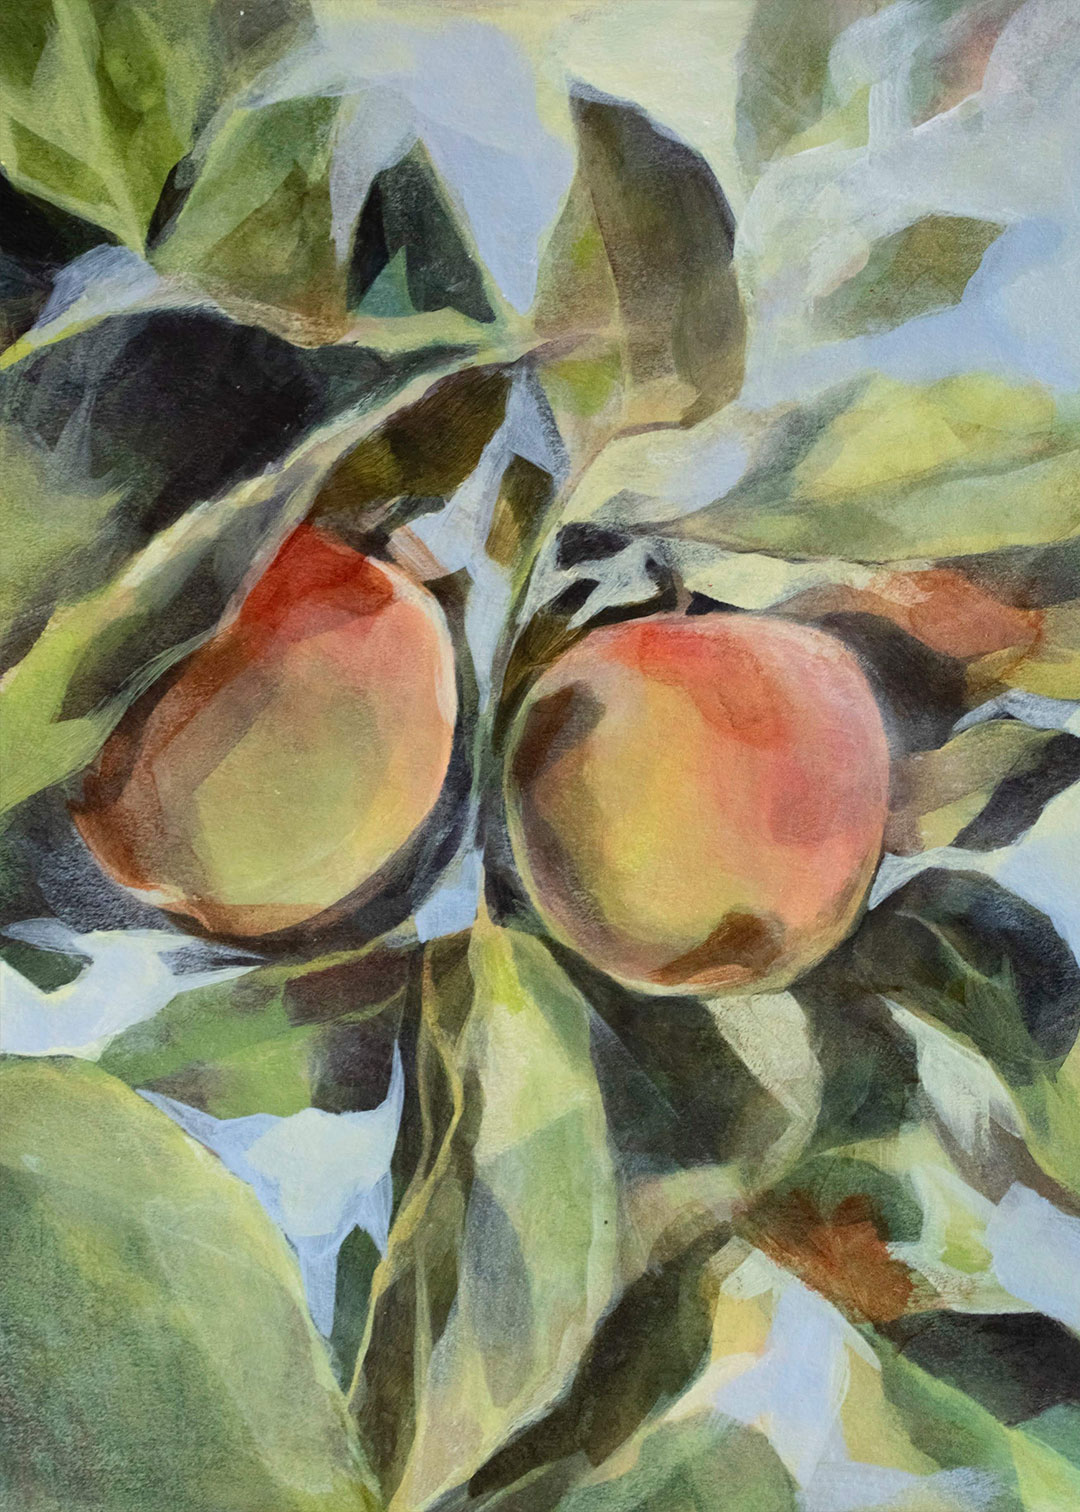 Acrylic painting of apples surrounded by leaves.